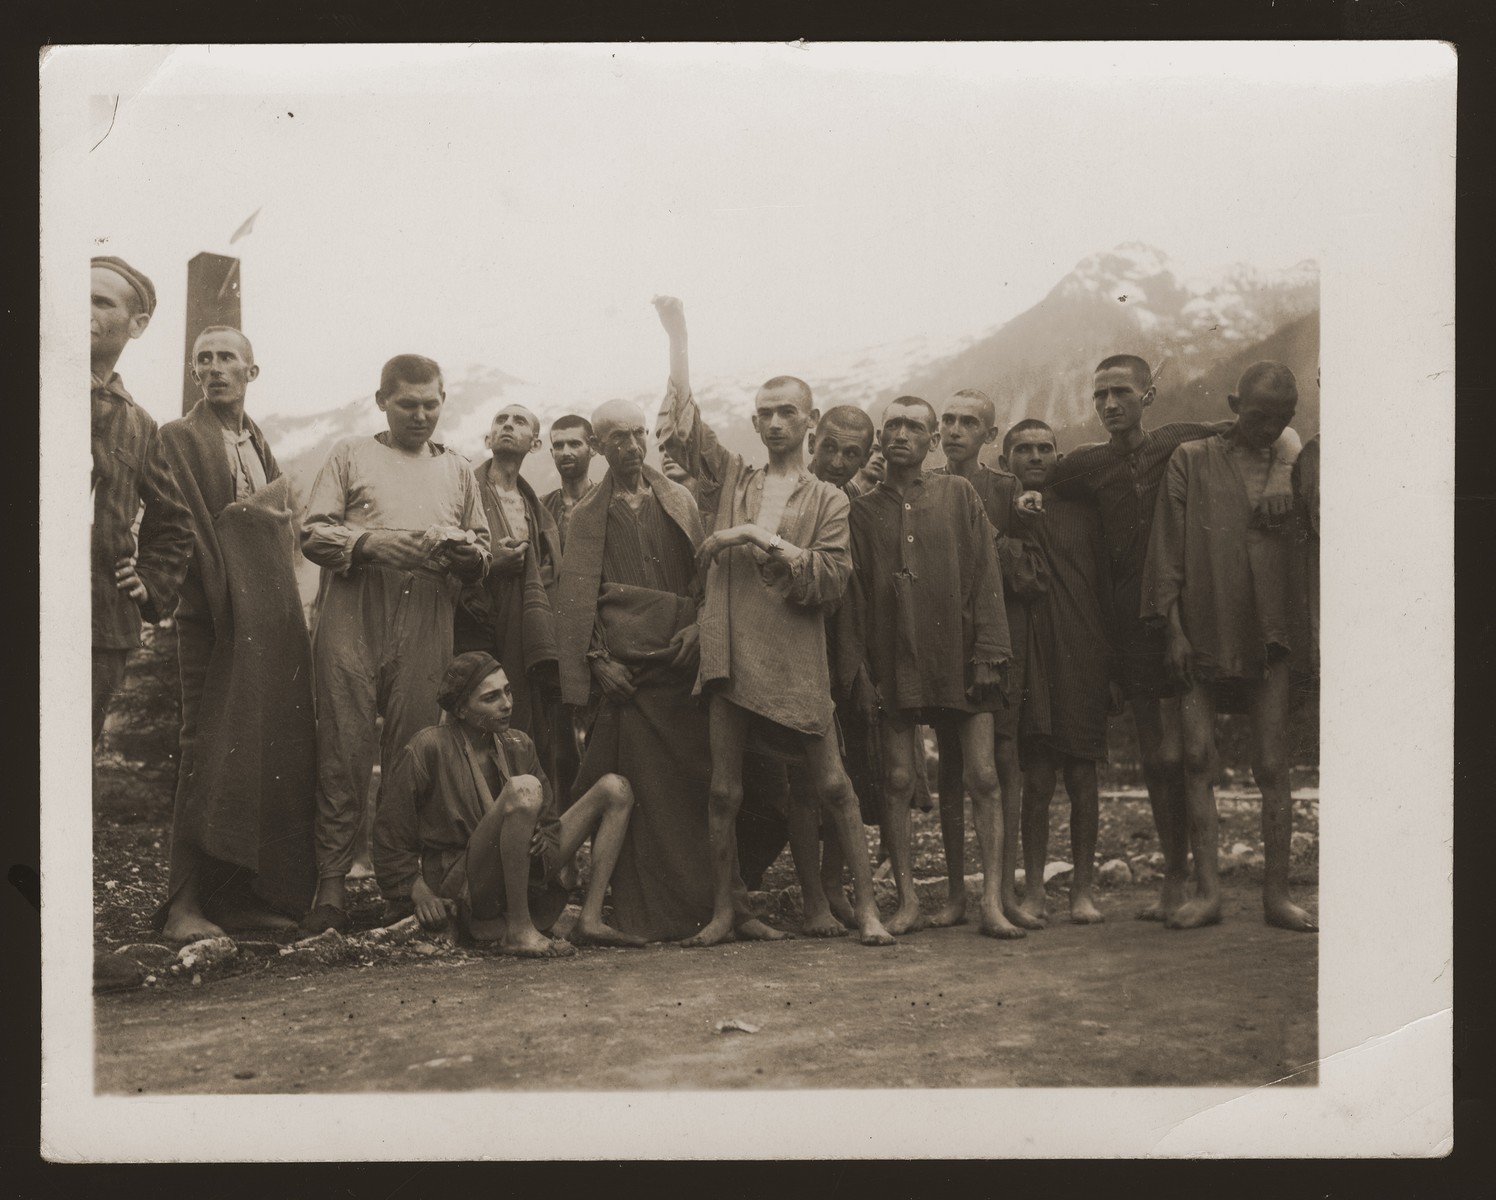 One day after their liberation, a group of former prisoners at the Ebensee concentration camp pose outside for US Army Signal Corps photographer Arnold Samuelson.

The former prisoners came out of the infirmary barracks in order to be photographed.  Visible behind them is the top of the crematorium chimney with a white flag on top.  Among those pictured is a 21-year-old Jewish survivor by the name of Joachim Friedner from Krakow, Poland (center with raised arm).